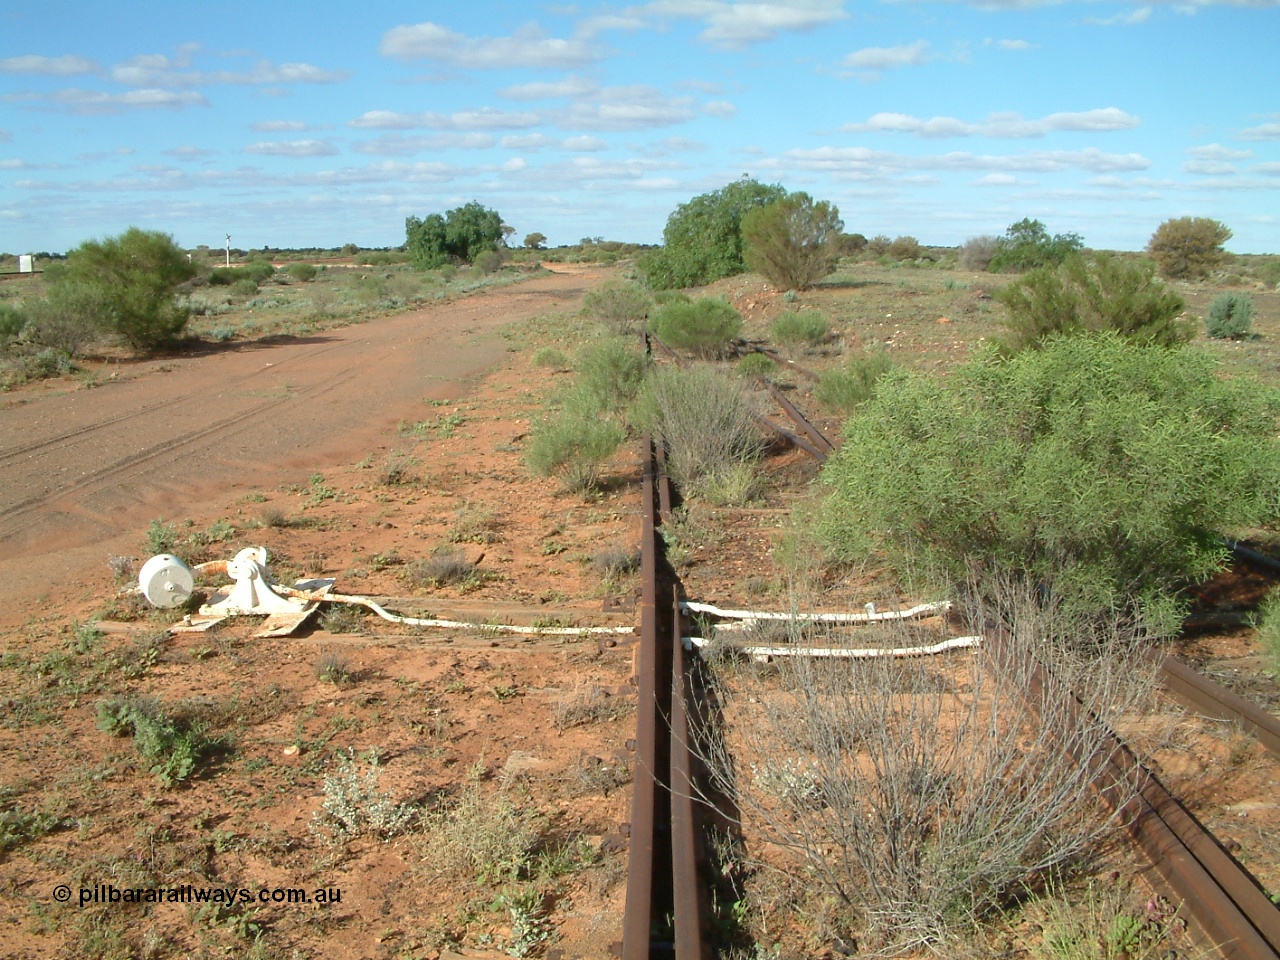 030415 155228
Tarcoola, at the 504.5 km, looking east, points for Camp Train and No. 2 Loco Roads with the No. 1 Water Road coming in from the right. Mainline to the left. [url=https://goo.gl/maps/y17pUsTYVeRwPsa67]GeoData location[/url]. 15th April 2003.
